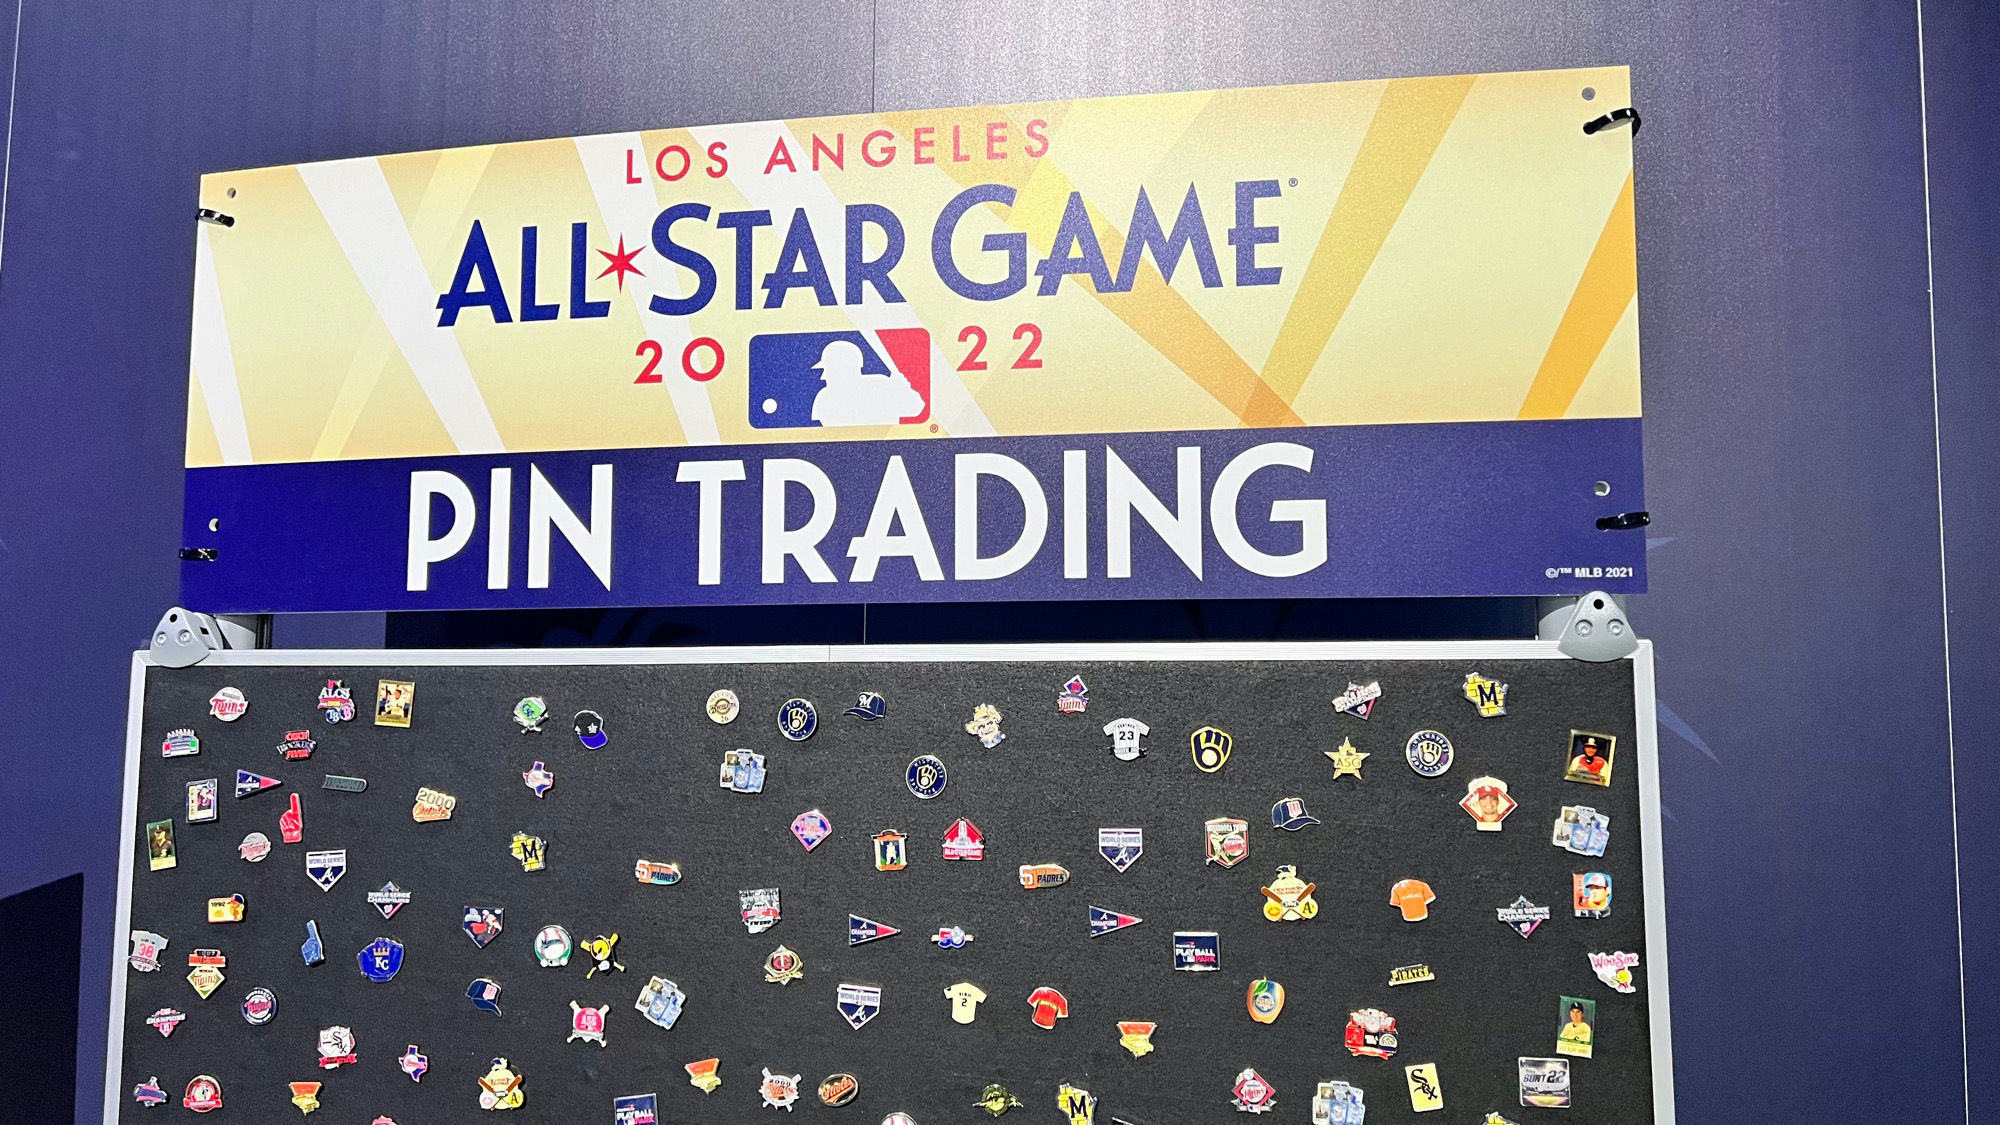 All Star Game Pin Trading